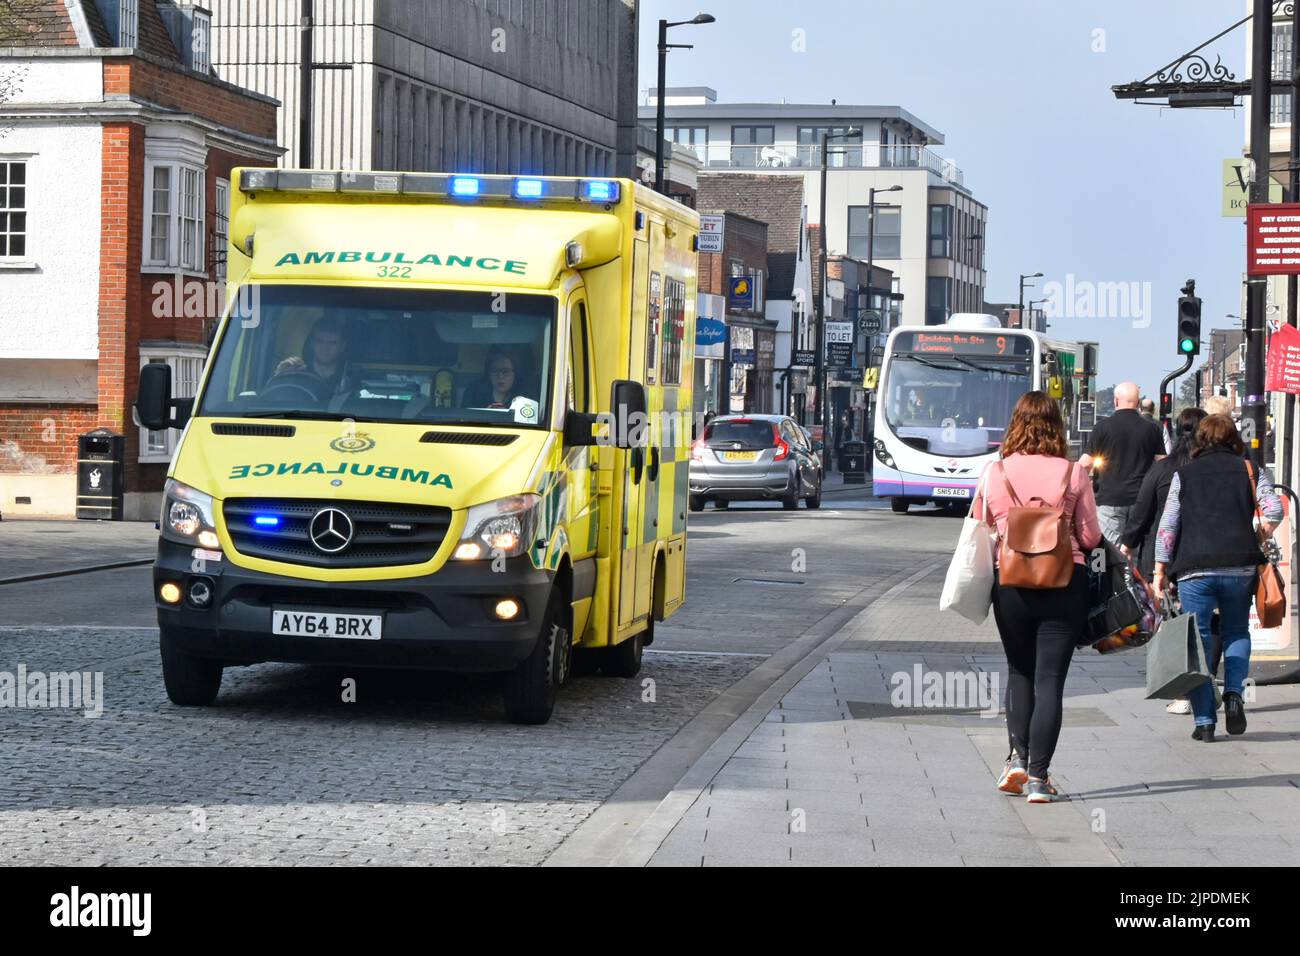 East of England blue lights Emergency Ambulance Service NHS vehicle & crew on 999 journey shoppers & bus in High Street  Brentwood Essex England  UK Stock Photo